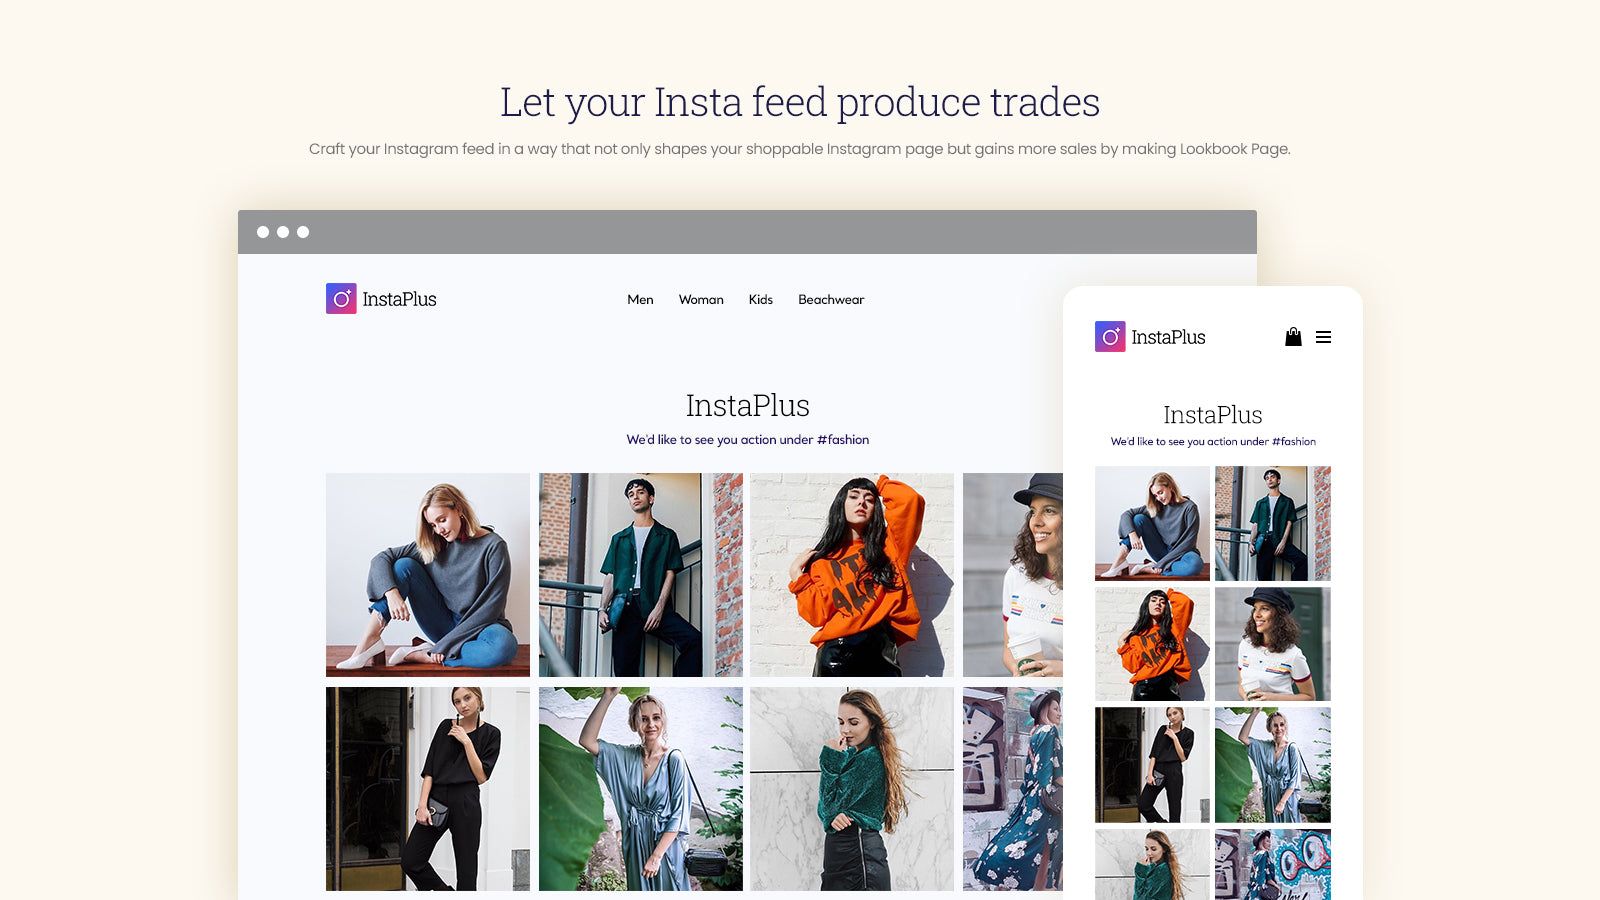 Let your Insta feed generate sales by adding a shoppable gallery